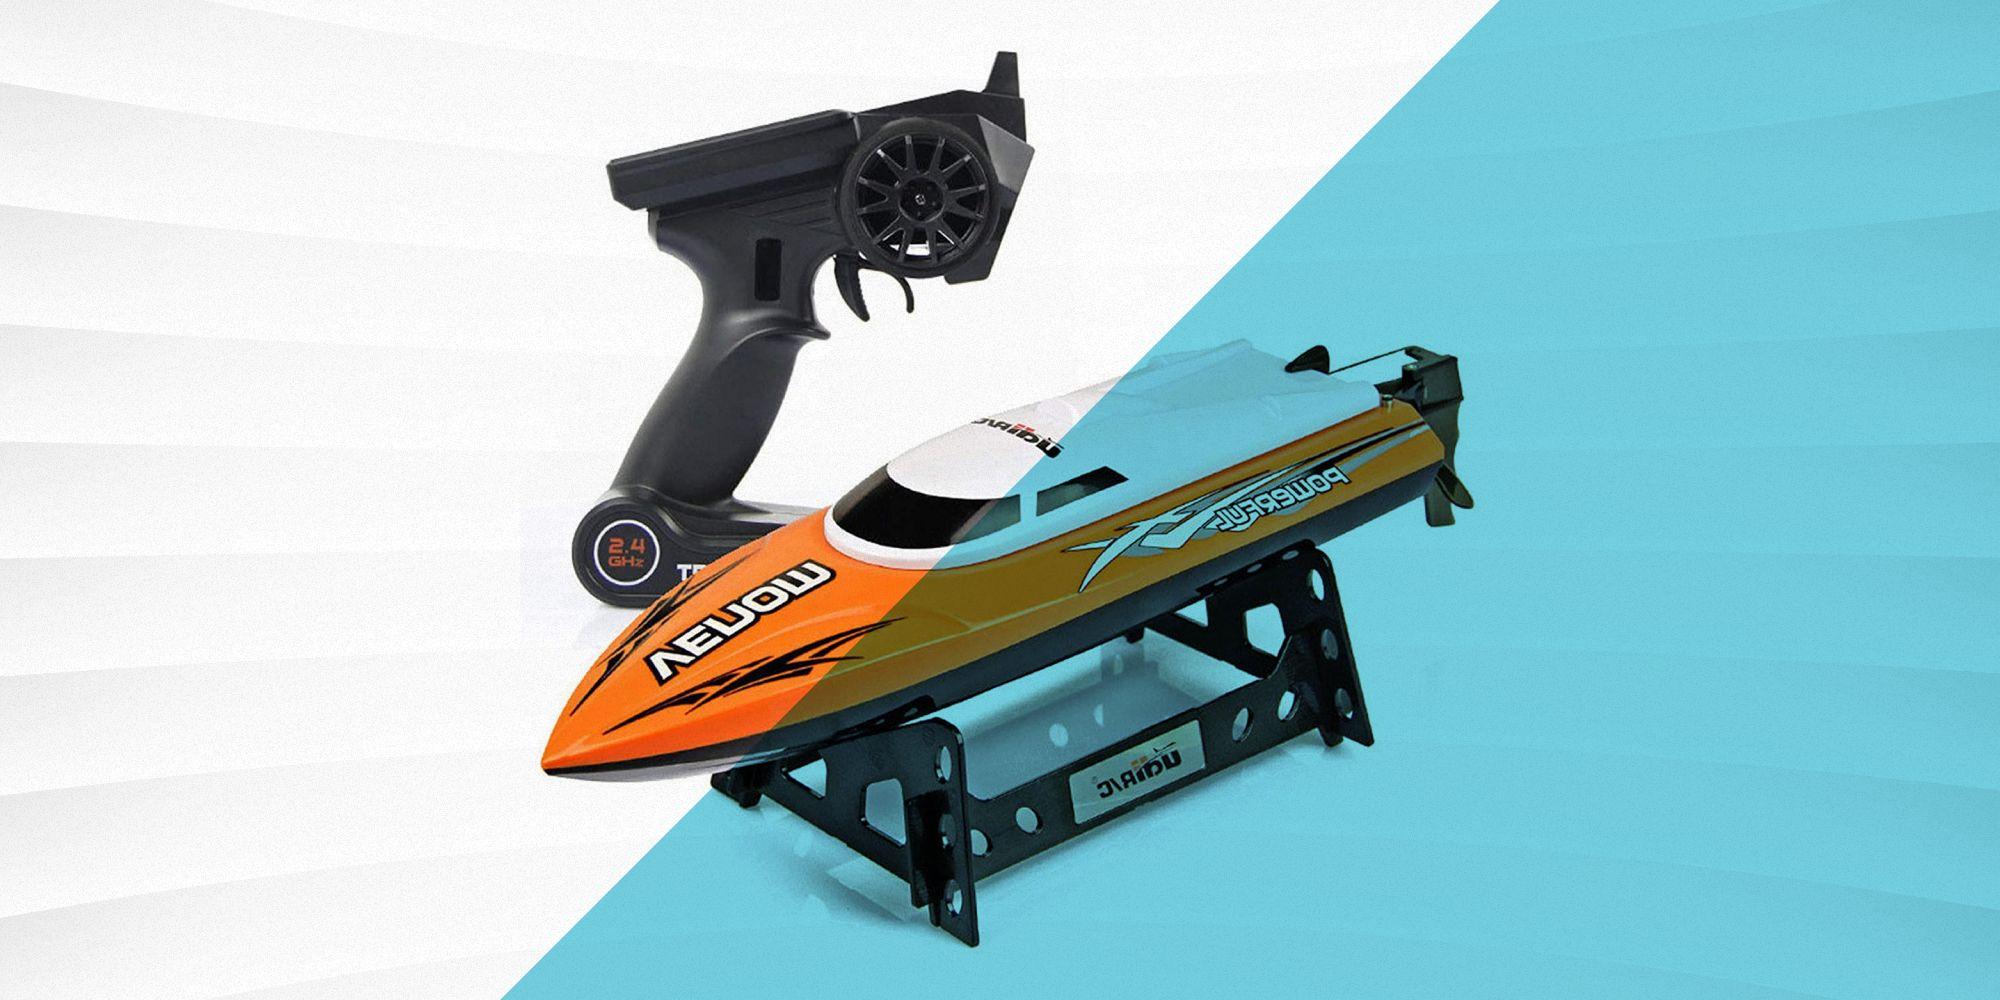 Little Rc Boats: Different types, sizes, and speeds of little RC boats.